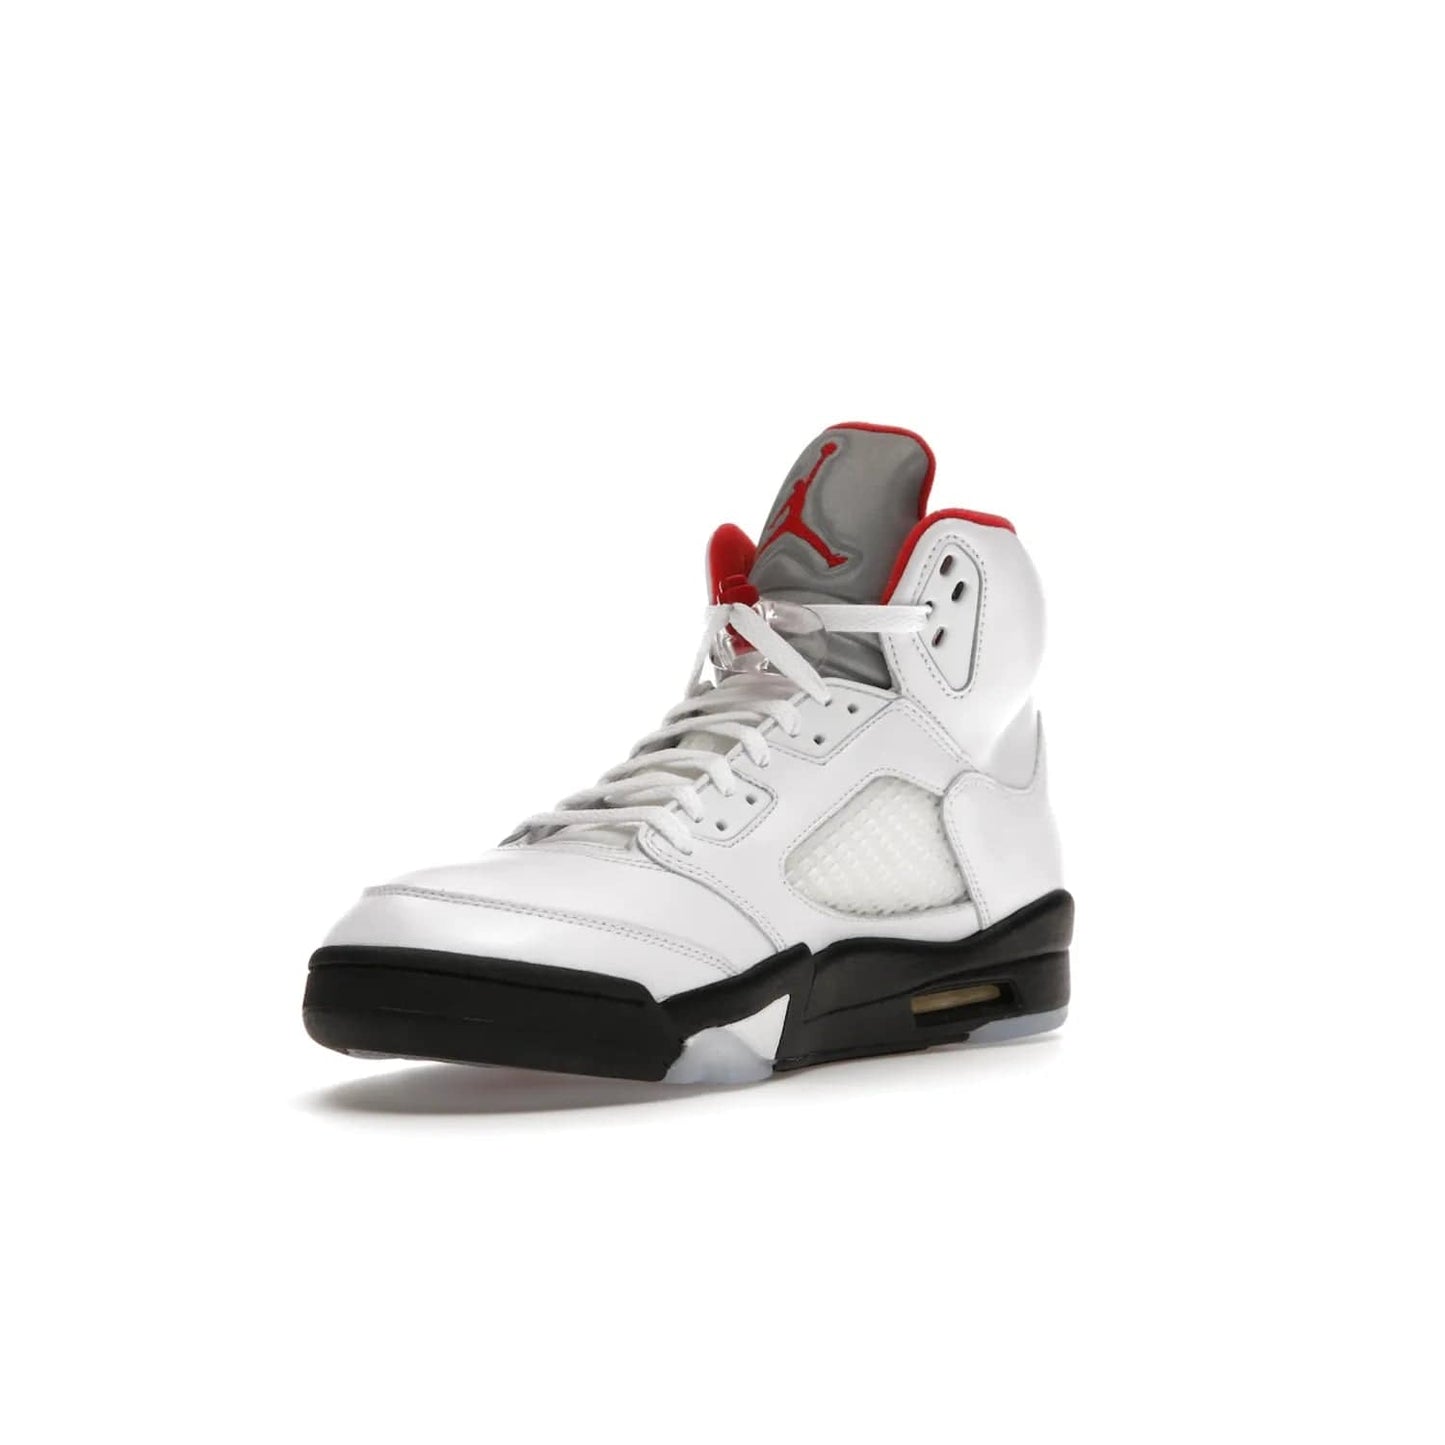 Jordan 5 Retro Fire Red Silver Tongue (2020) - Image 14 - Only at www.BallersClubKickz.com - Experience classic styling with the Jordan 5 Retro Fire Red Silver Tongue (2020). Features a white leather upper, 3M reflective tongue, midsole colorblocking, and an icy translucent outsole. Now available, upgrade your shoe collection today.